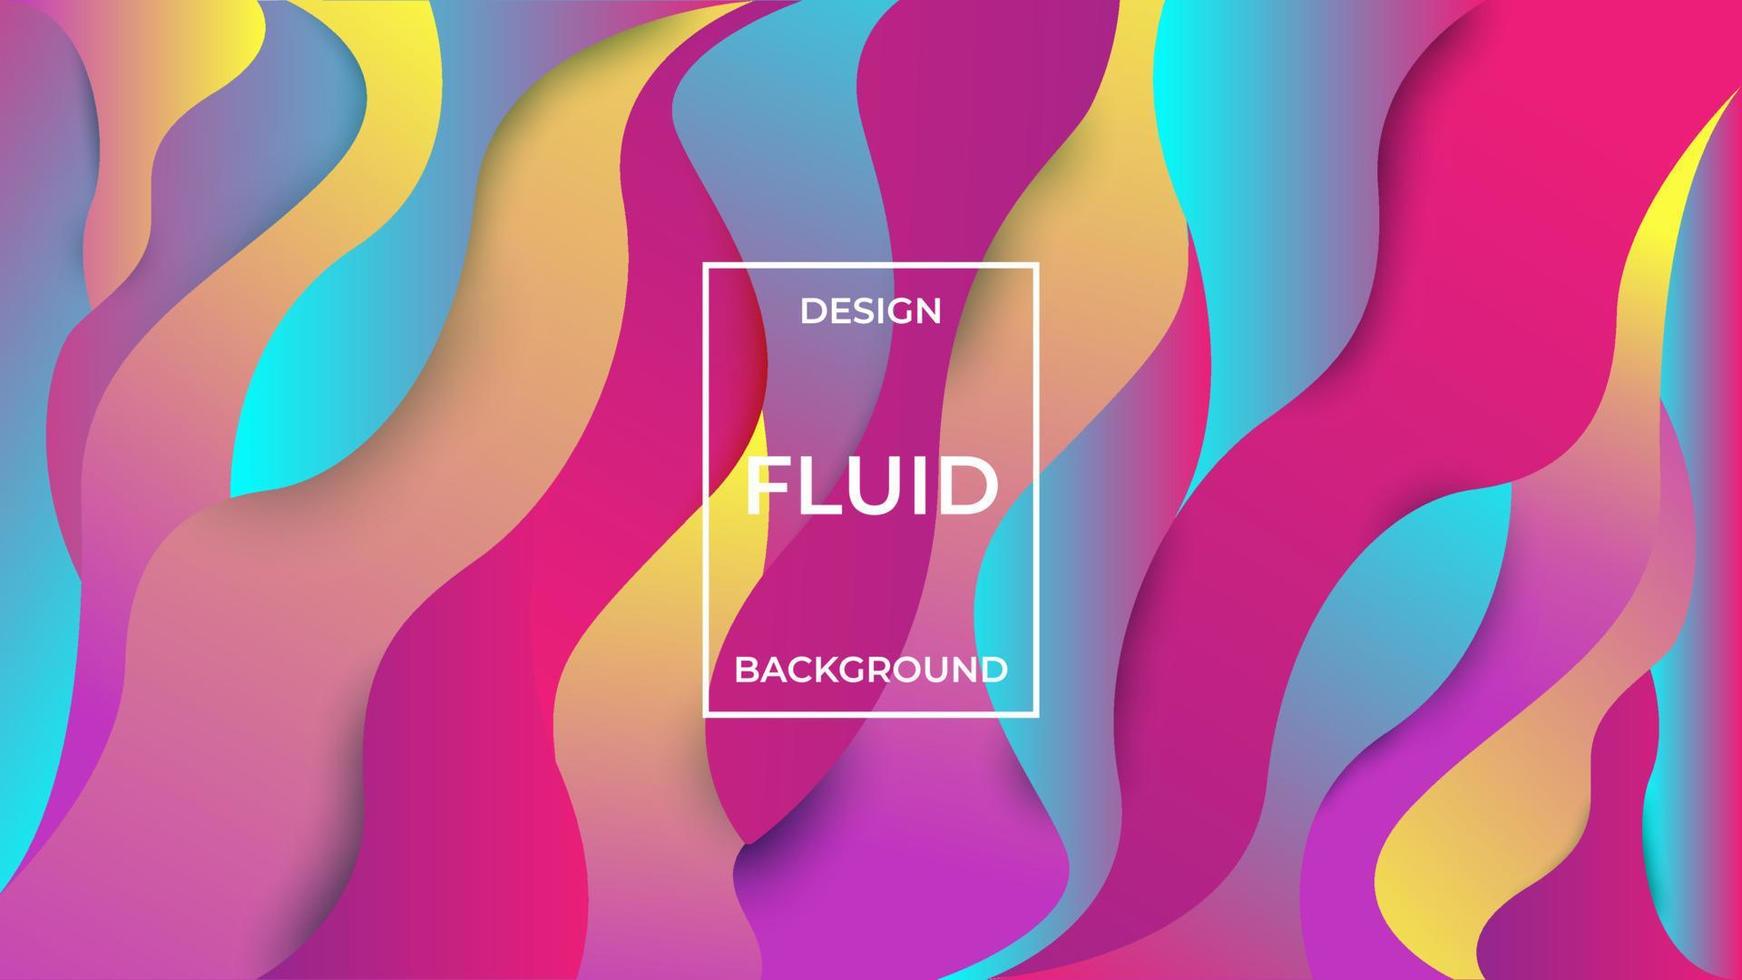 Abstract Colorful Fluid Background For Banner, Website Backdrop, Flyer, Design Promotion And Business Presentation vector